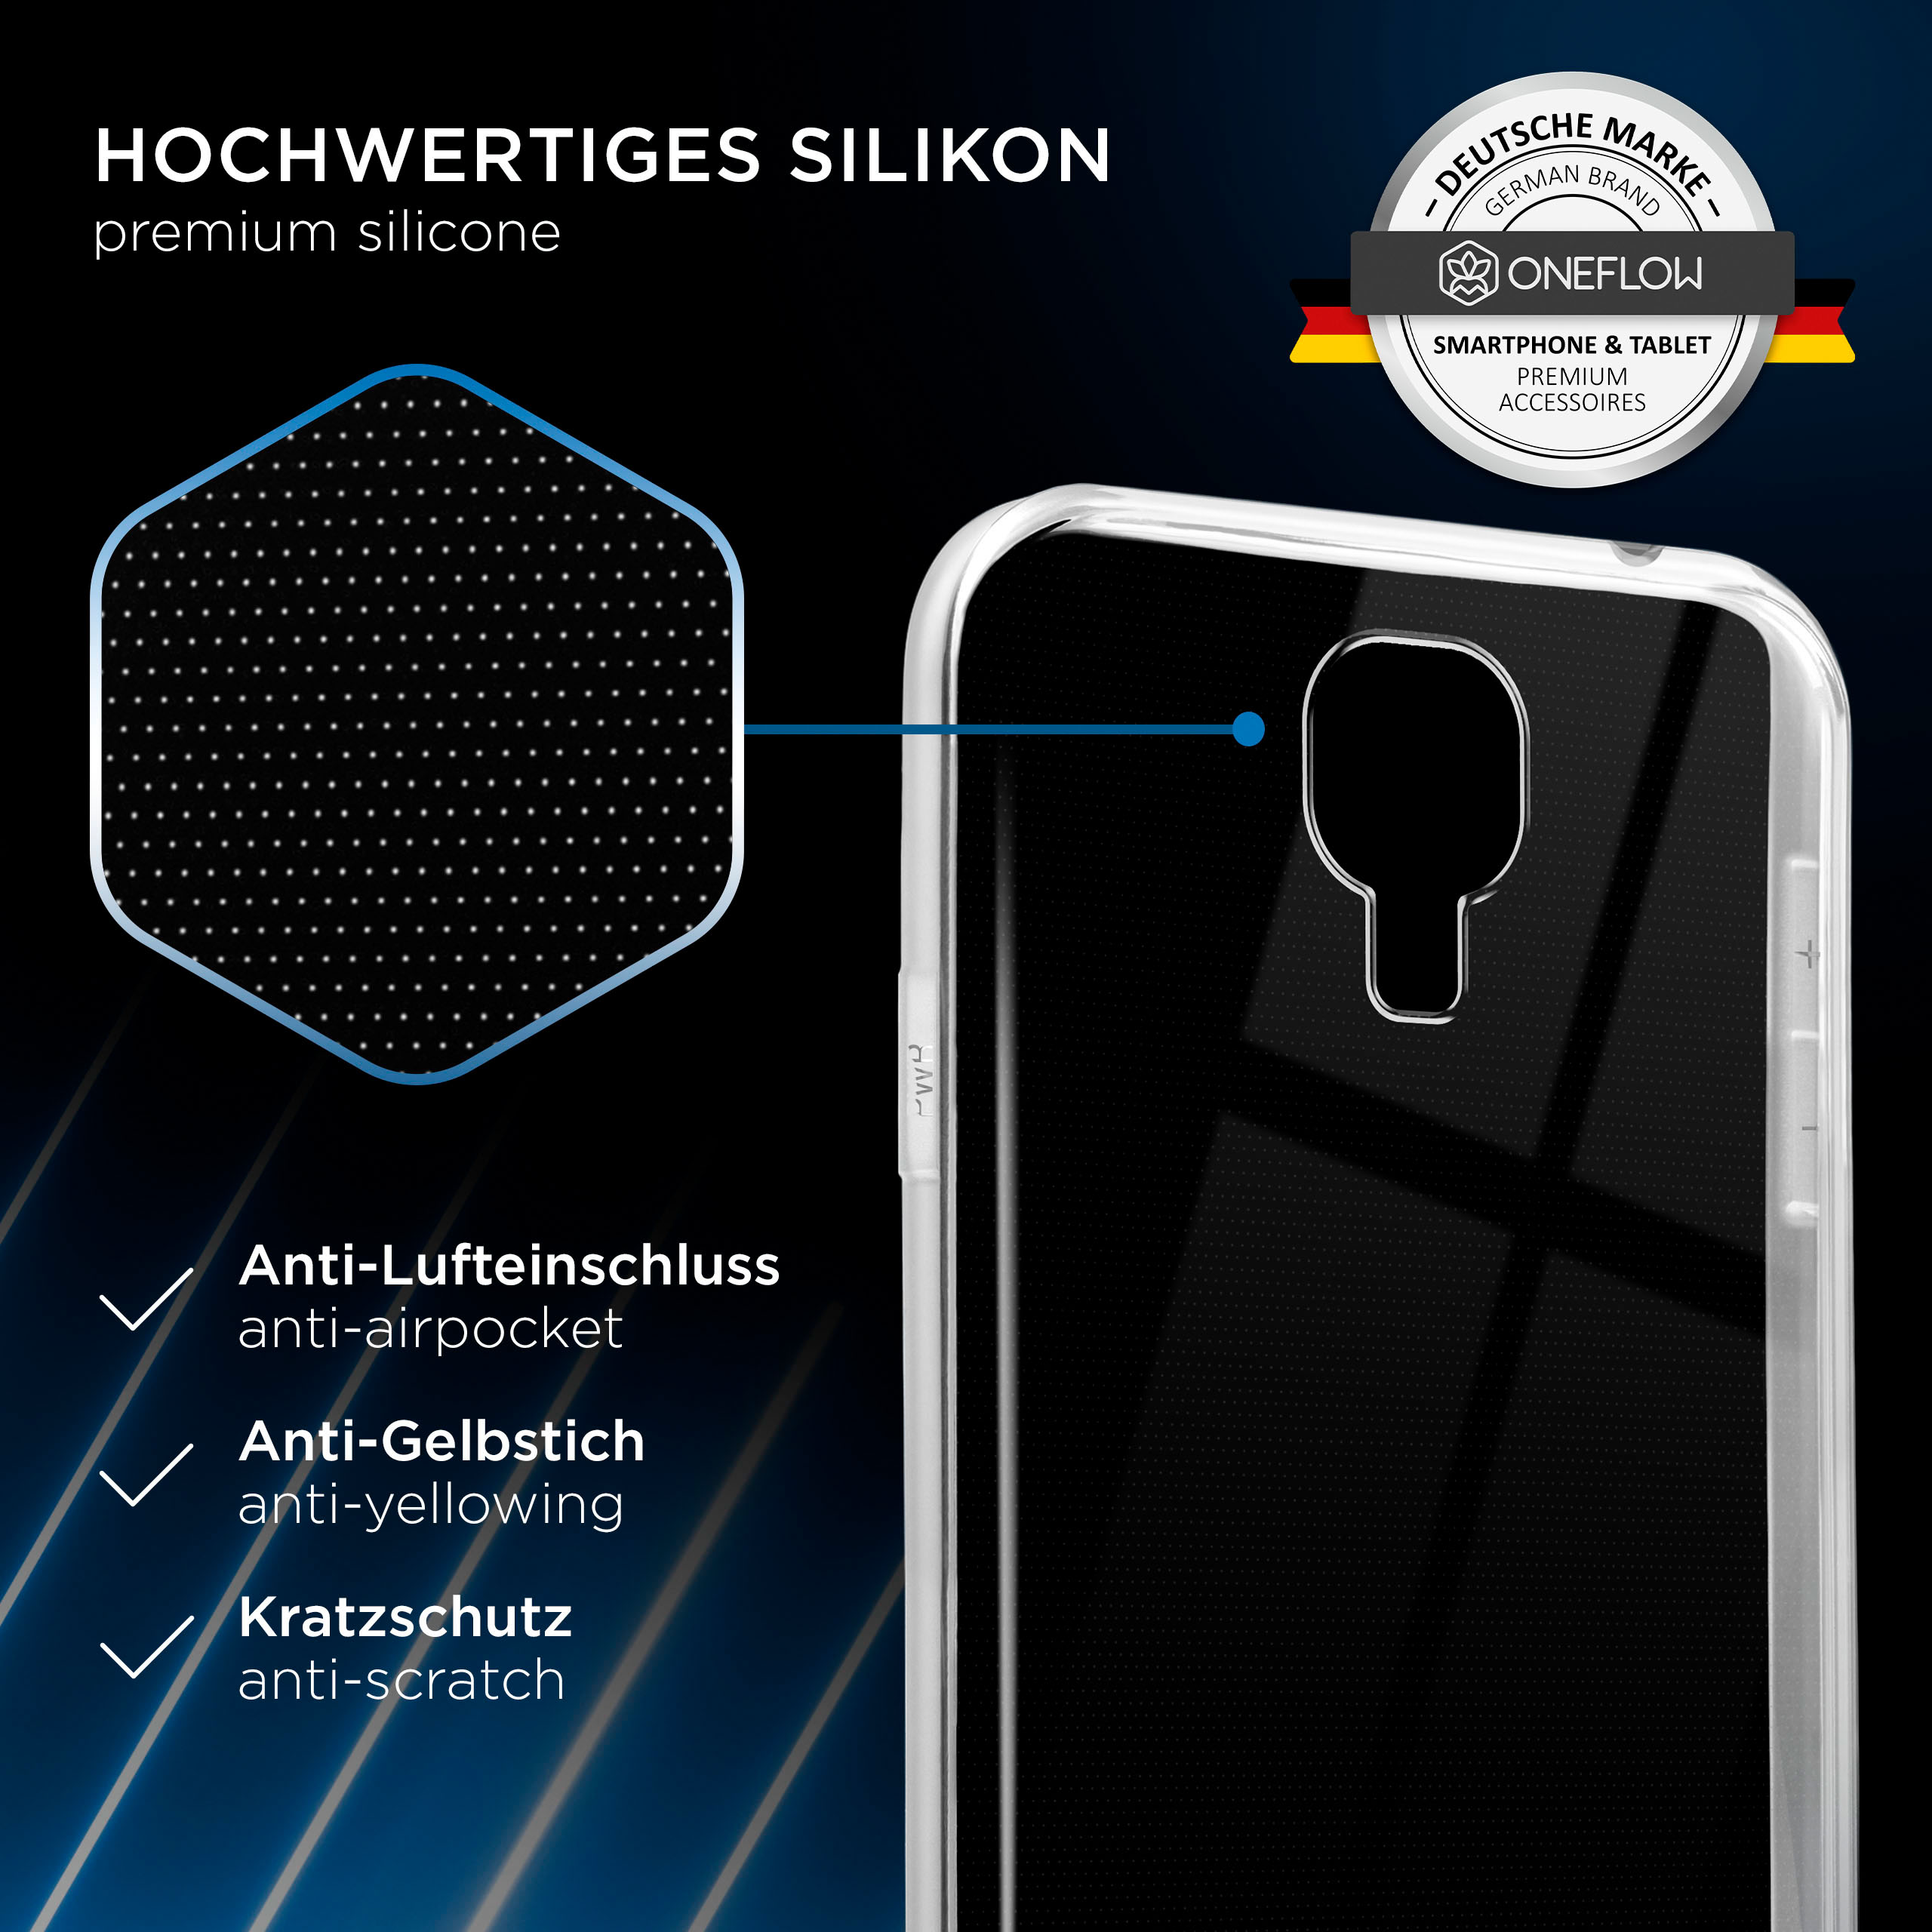 Case, Crystal-Clear Galaxy Backcover, Clear Samsung, ONEFLOW S4,